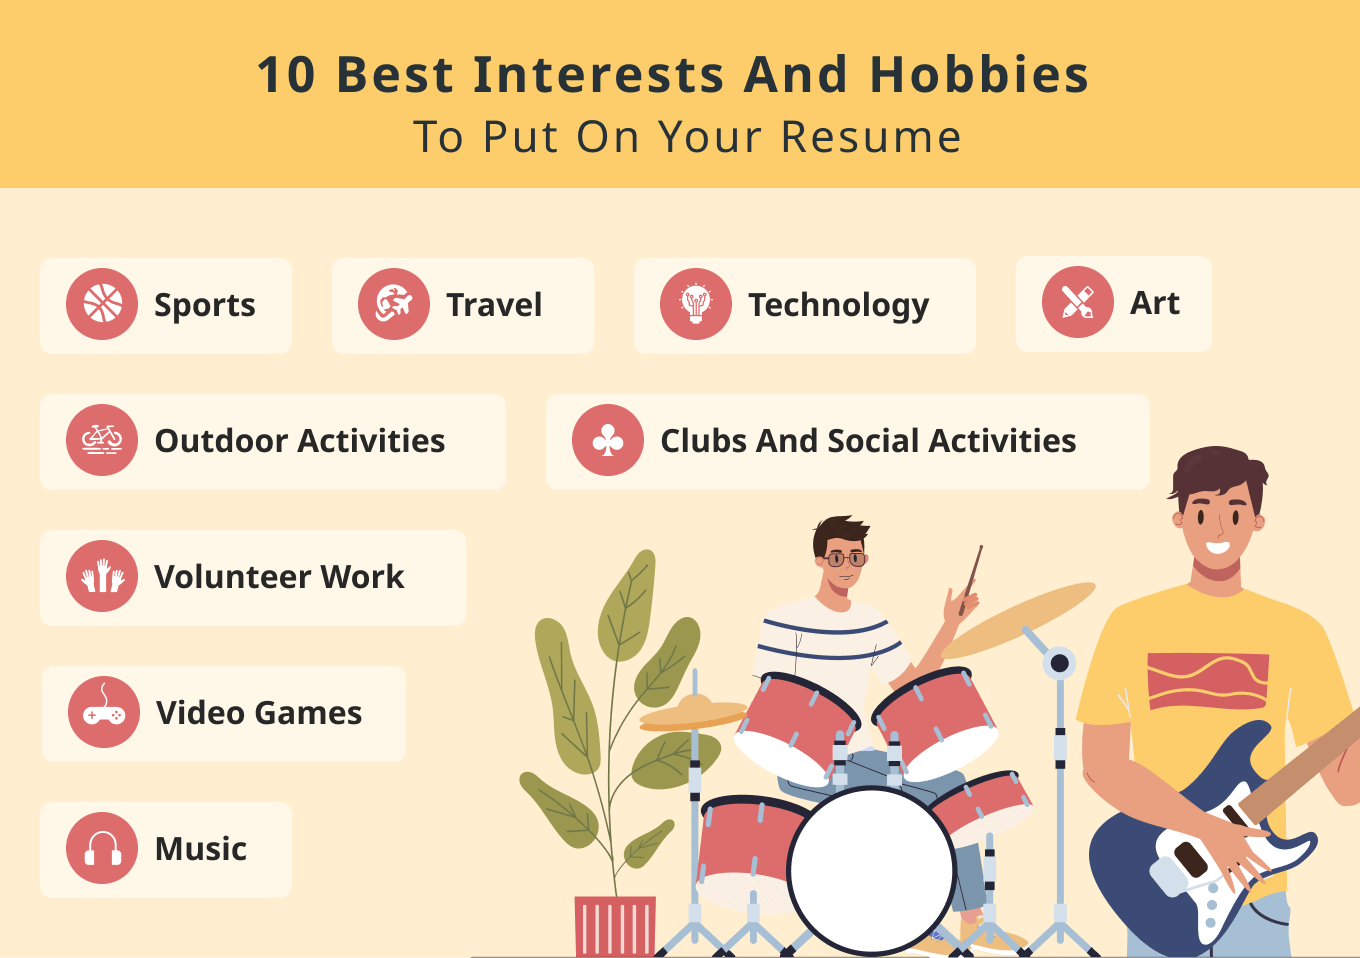 List of interests on a resume that include sports, travel, outdoor activities, volunteer work, video games, music, technology, clubs and social activities, and art